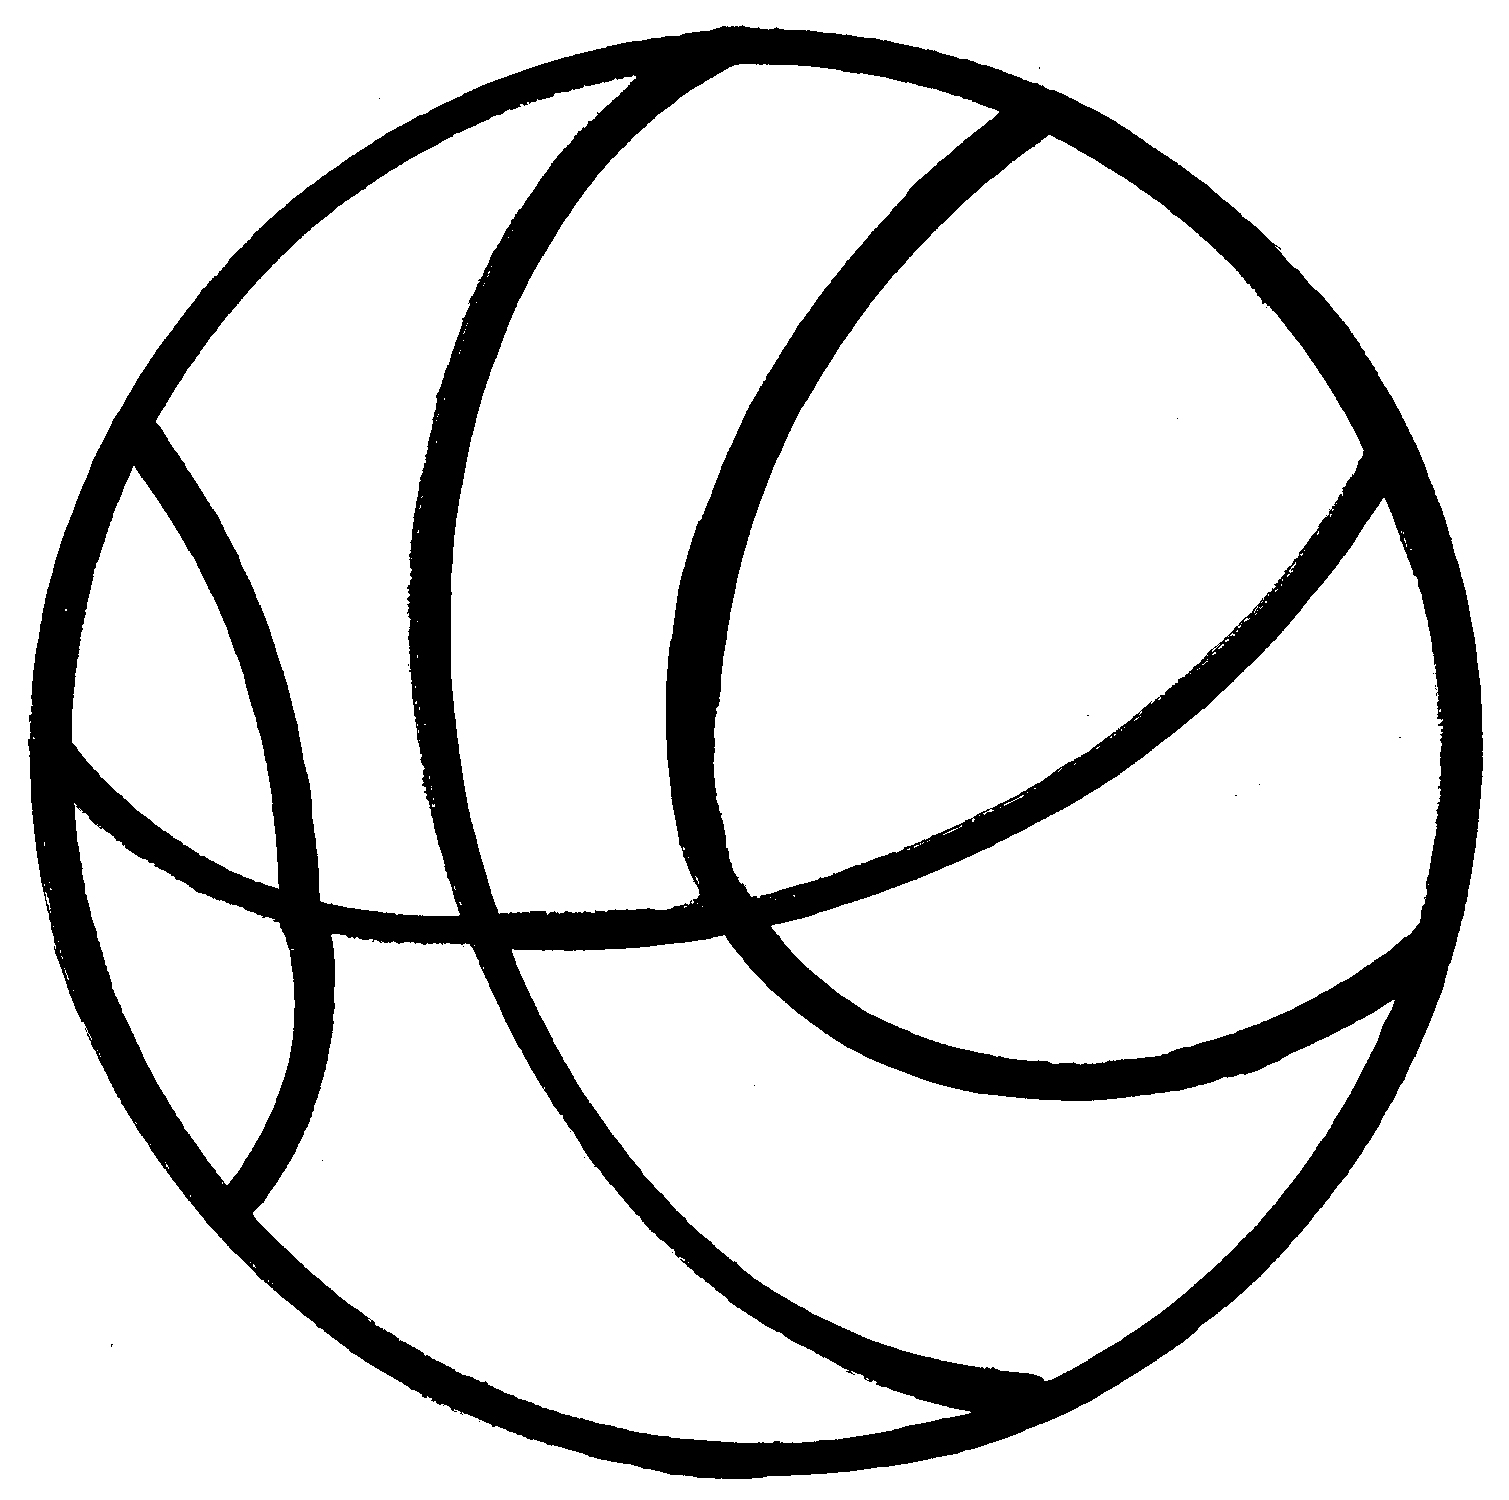 Basketball clip art free basketball clipart to use for party image 6